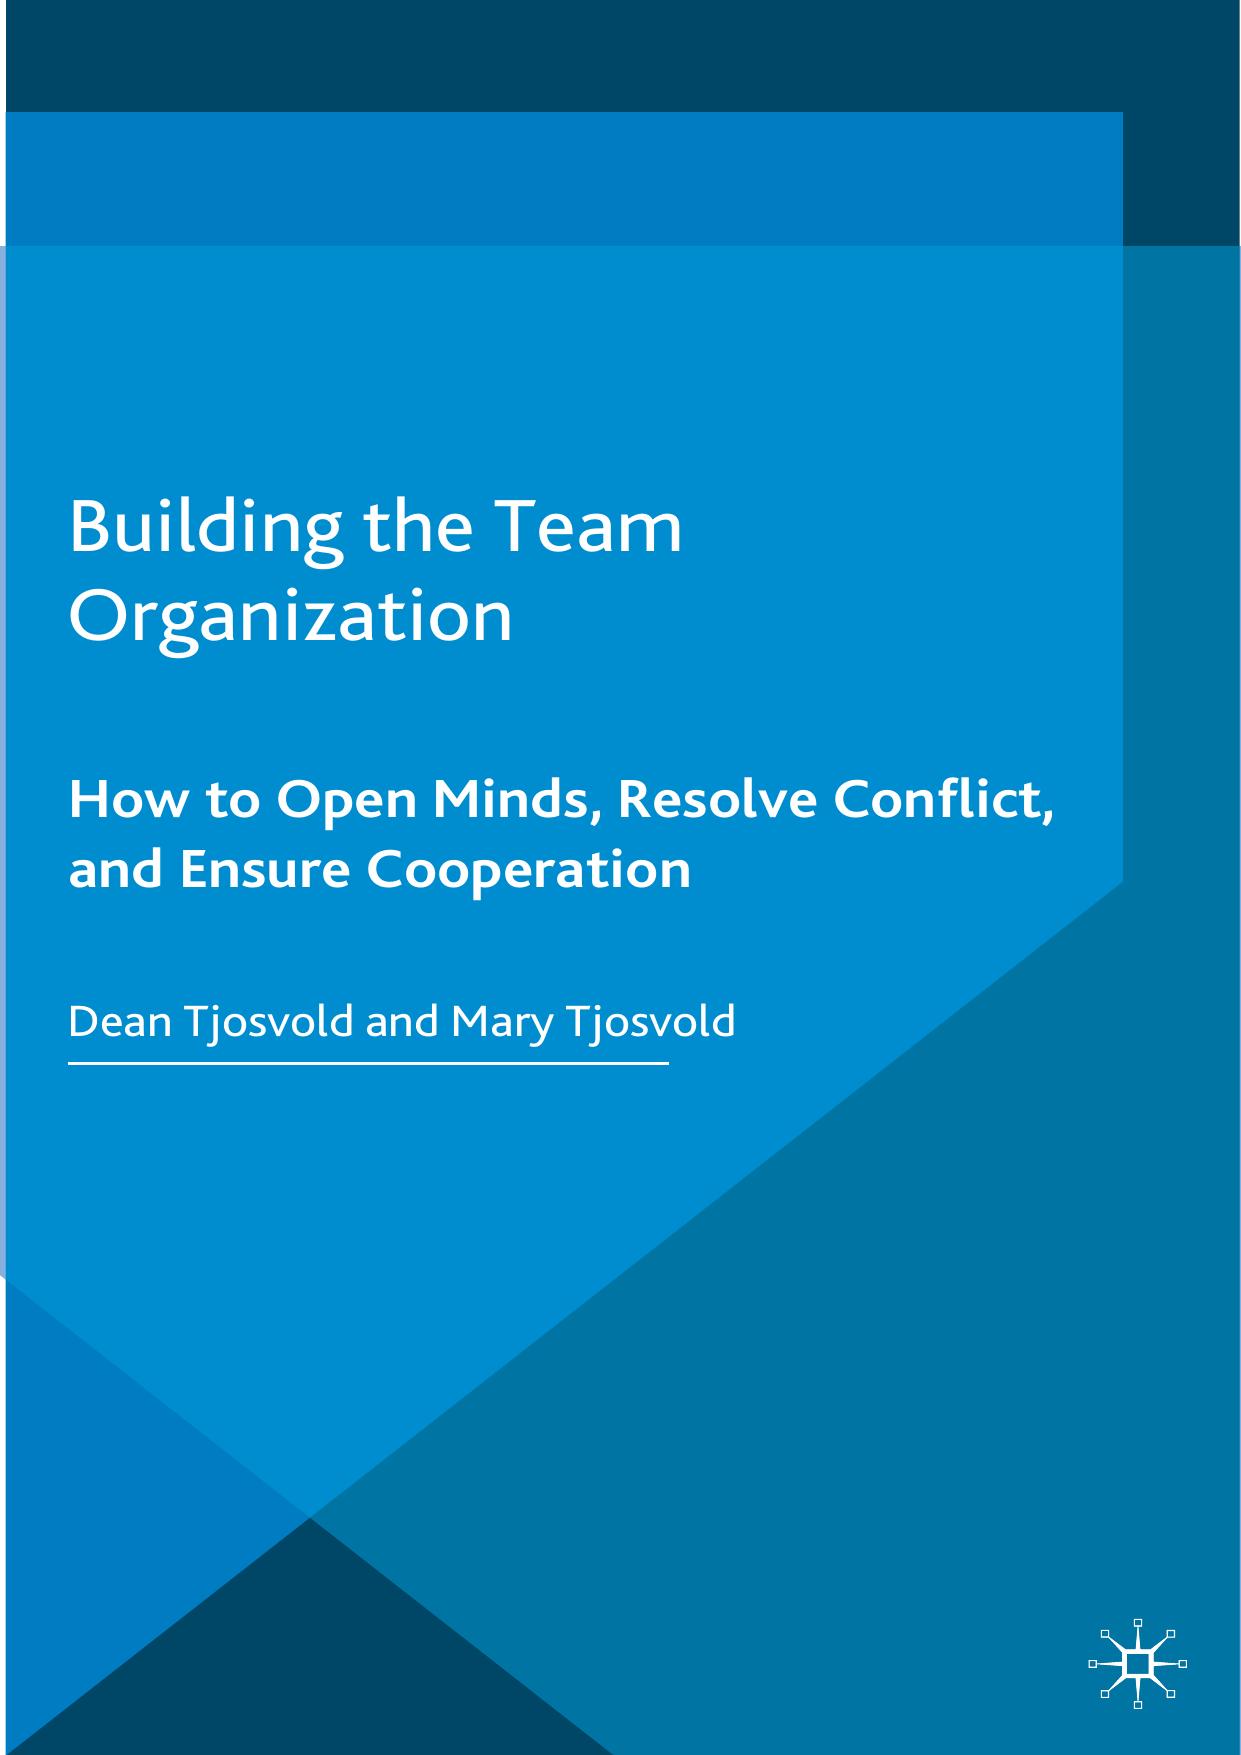 Building the Team Organization How To Open Minds, Resolve Conflict, and Ensure Cooperation by Dean Tjosv